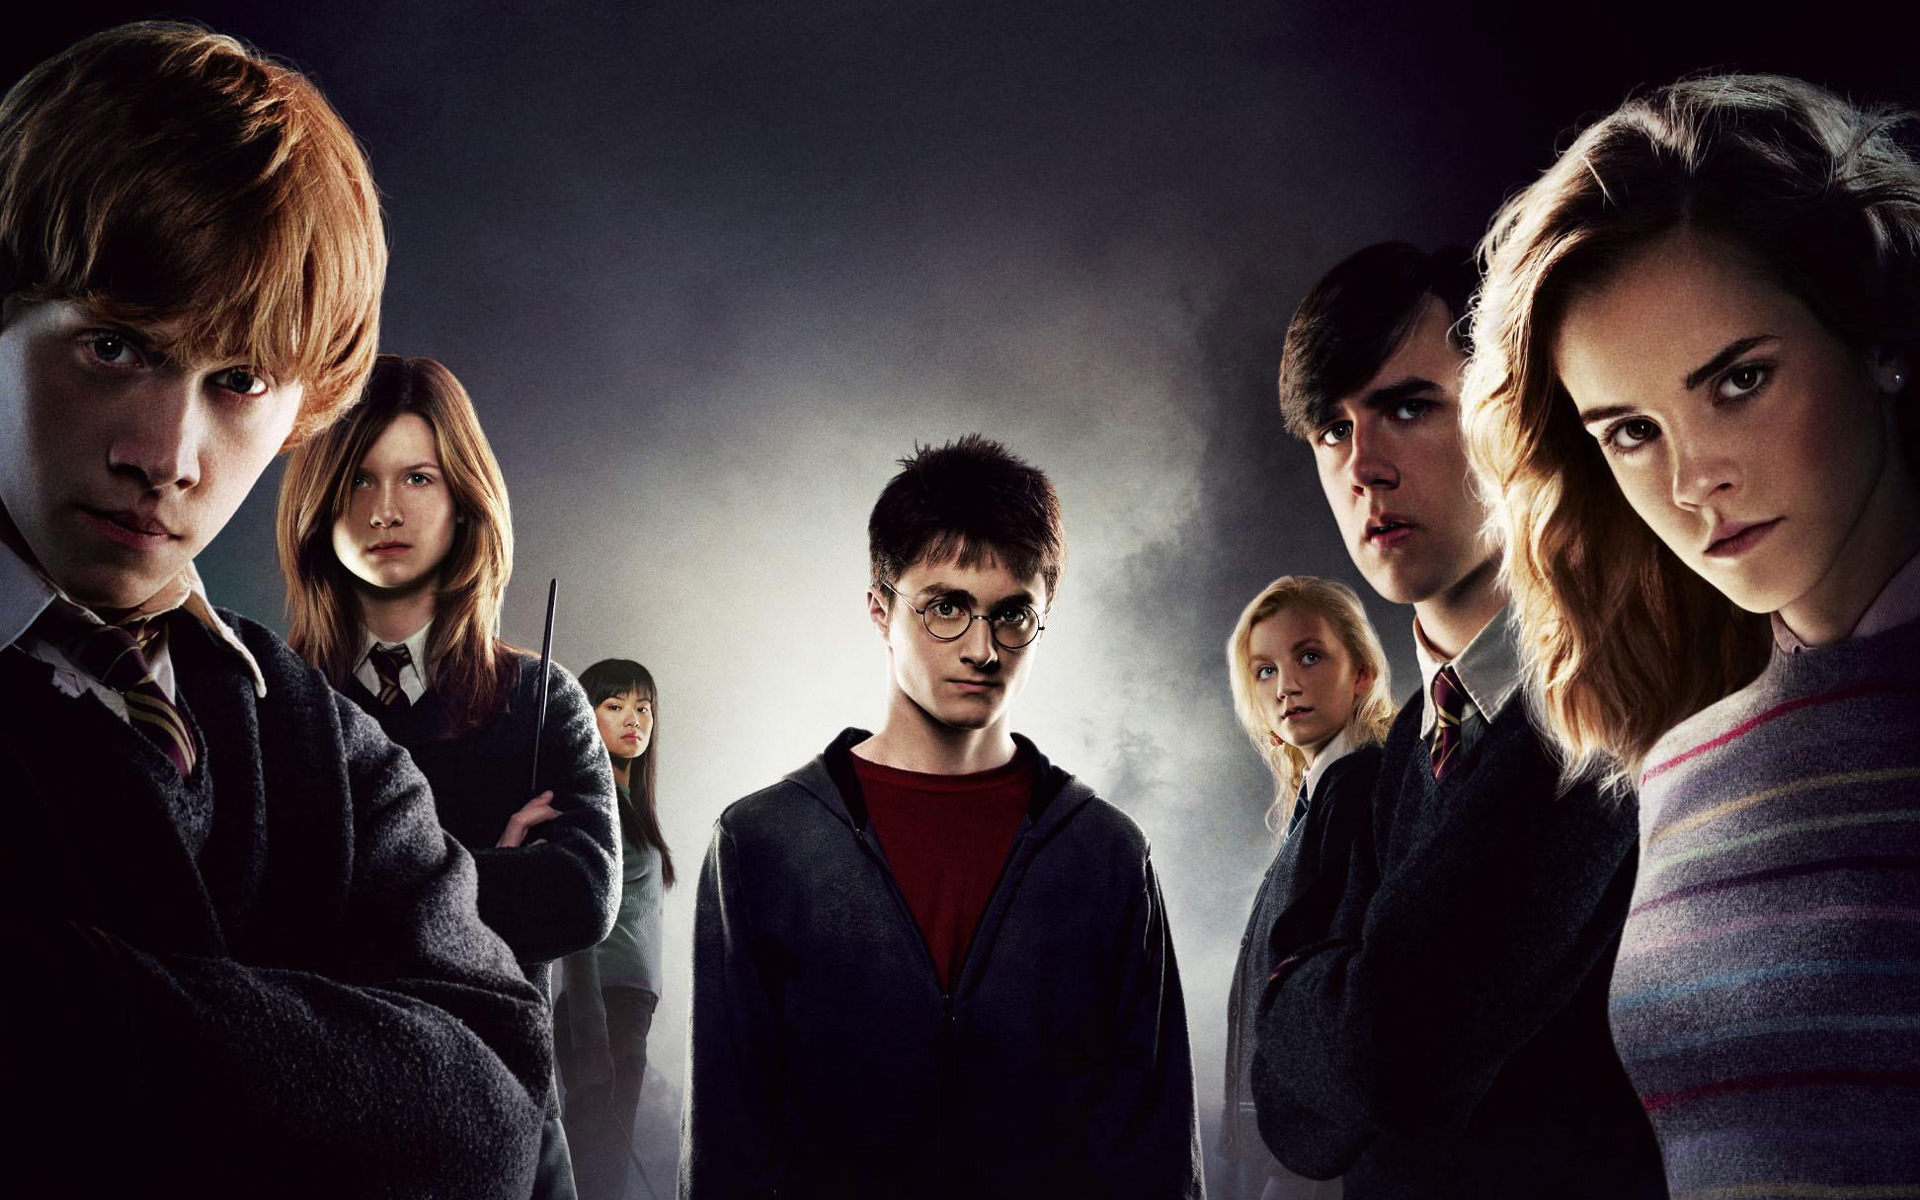 8 Harry Potter Theories That Are Pretty Crazy But You Might End Up Believing Them!